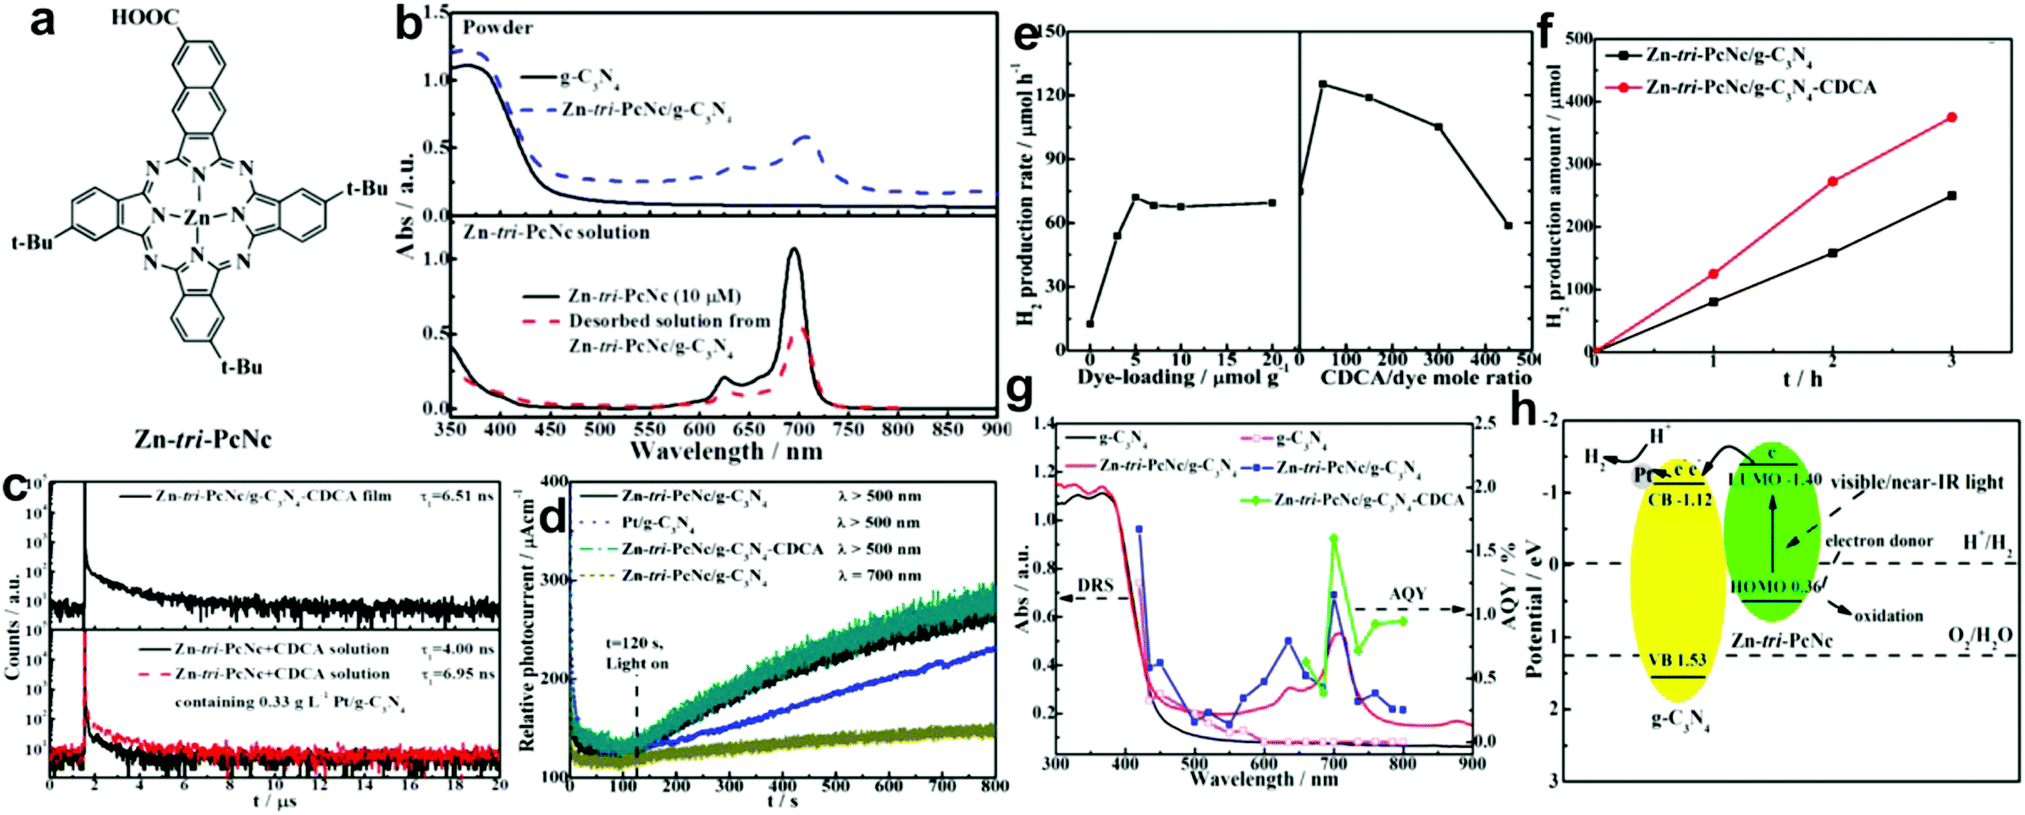 Semiconductor Polymeric Graphitic Carbon Nitride Photocatalysts The Holy Grail For The Photocatalytic Hydrogen Evolution Reaction Under Visible Lig Energy Environmental Science Rsc Publishing Doi 10 1039 C9eeb